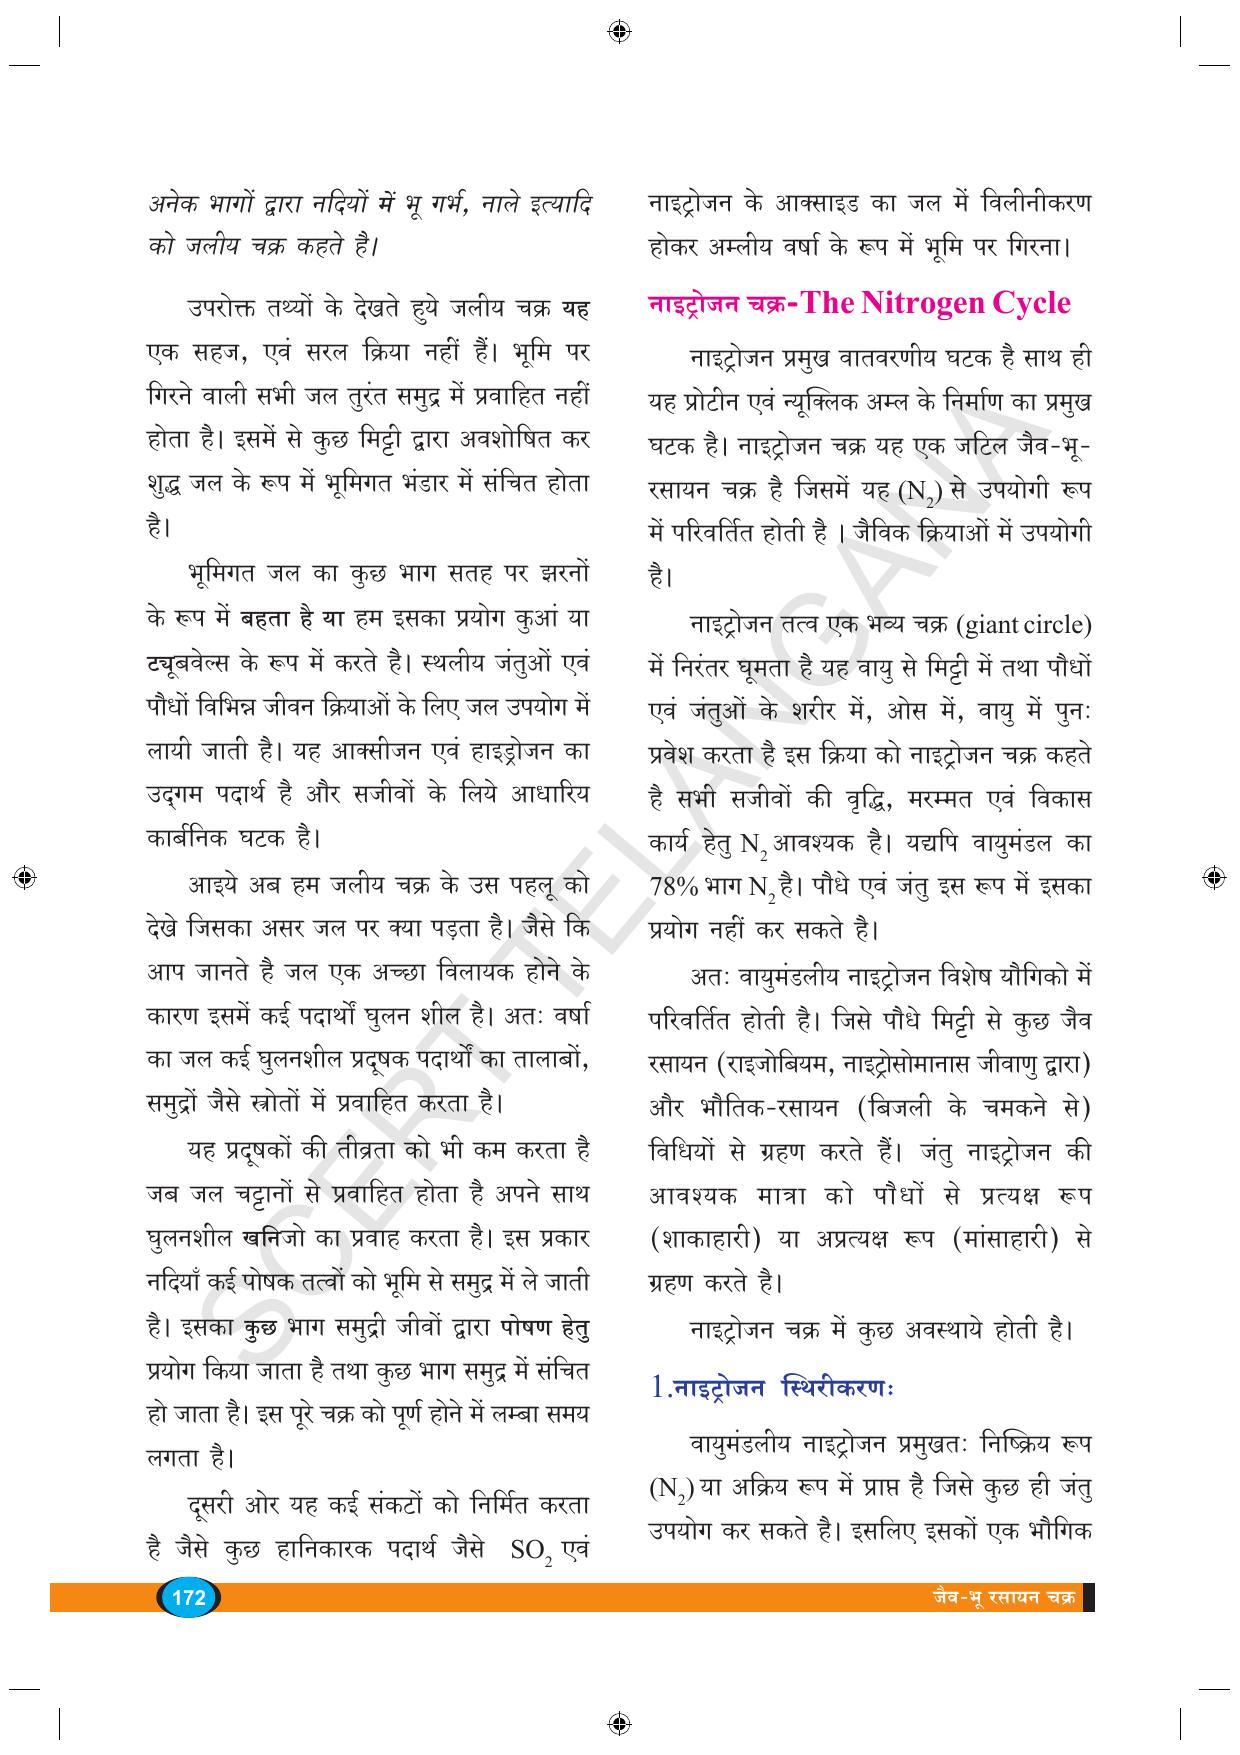 TS SCERT Class 9 Biological Science (Hindi Medium) Text Book - Page 184